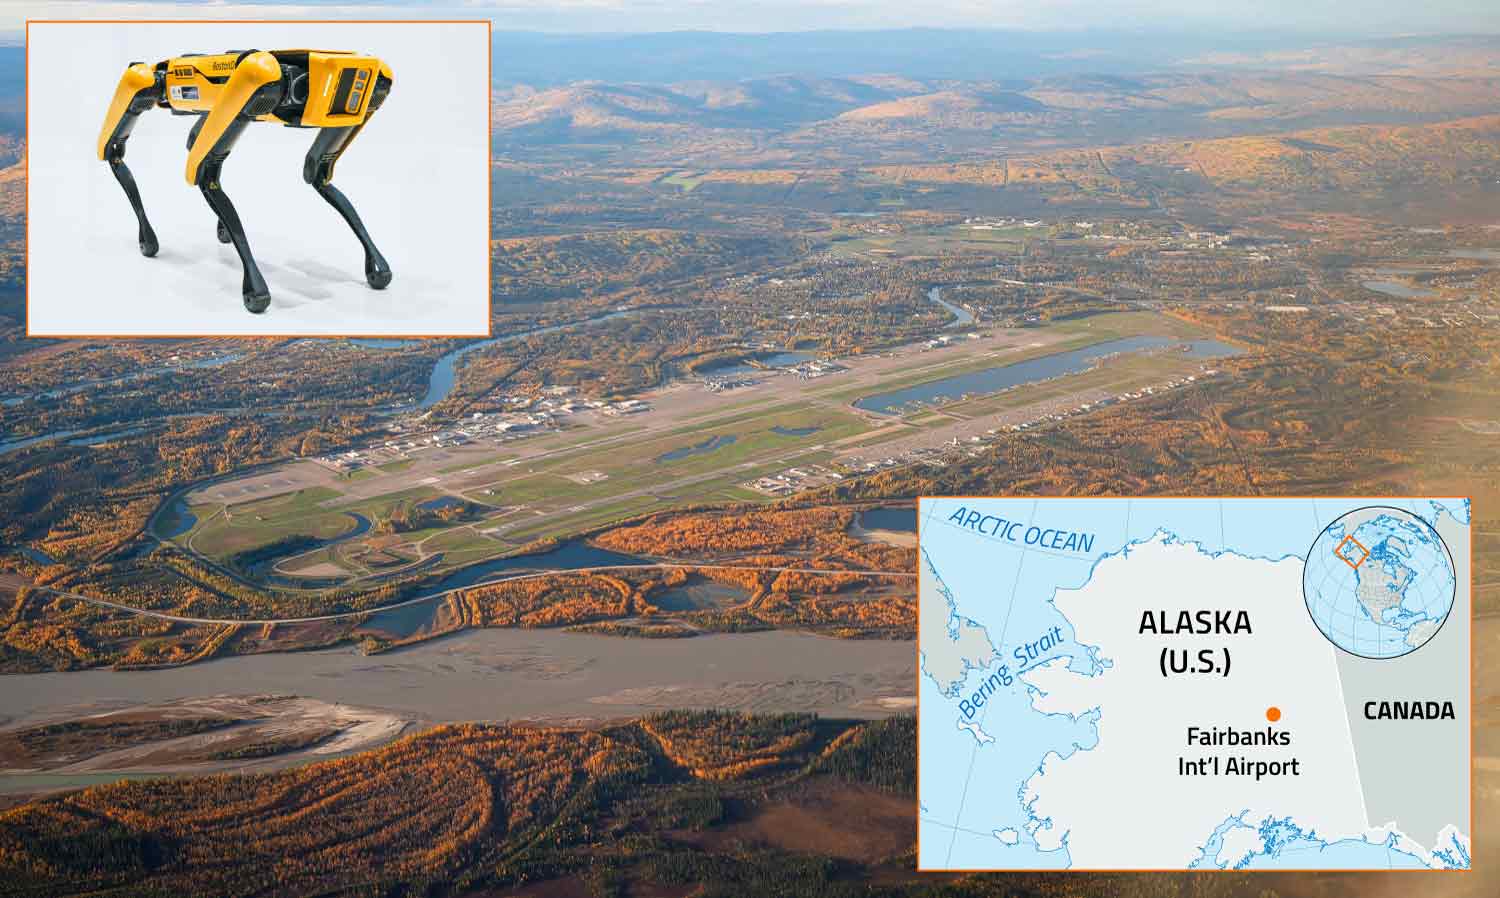 Overhead view of Fairbanks Airport with insets of the Aurora robot and a map showing the location of the airport in Alaska